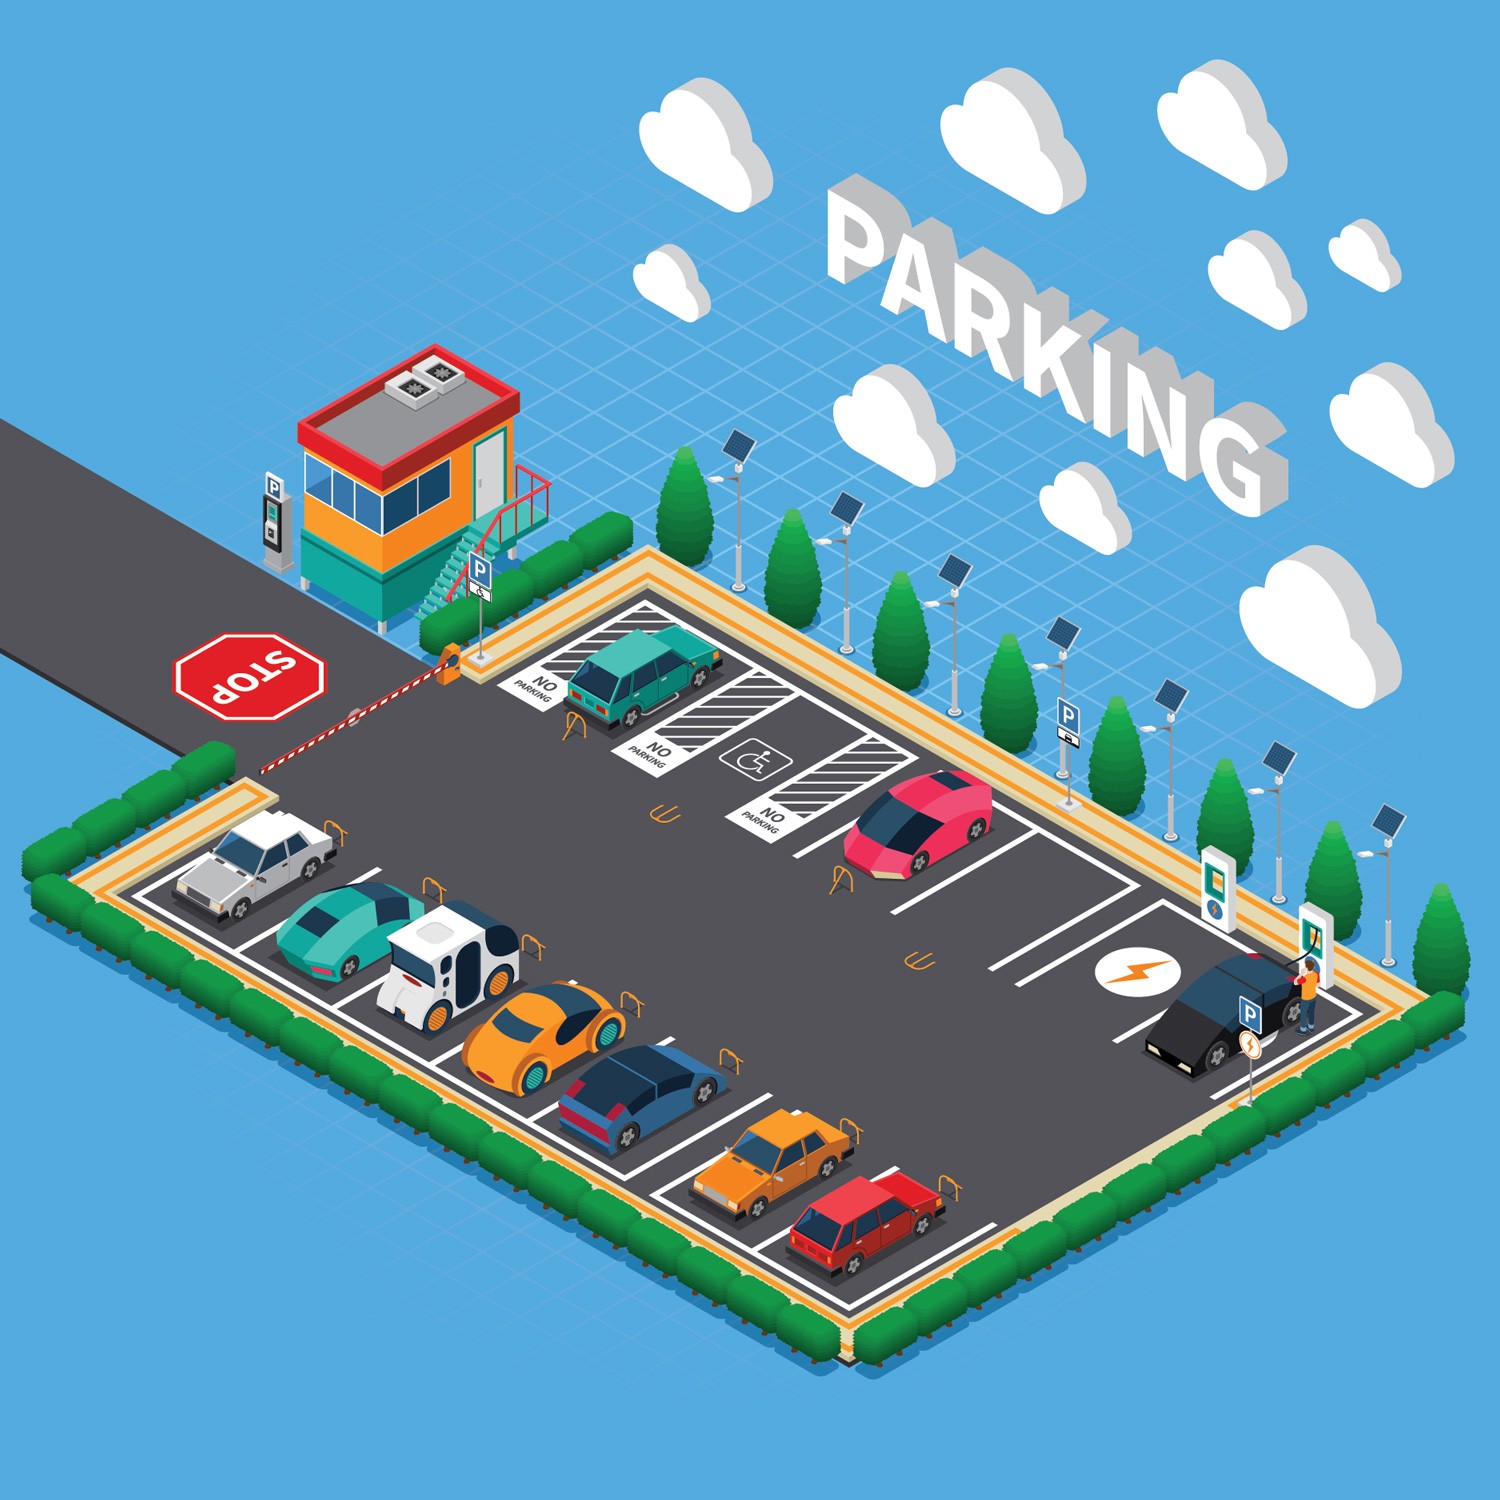 Perpendicular parking lot with plug in electric vehicles ecological charging stalls attendant booth isometric composition vector illustration